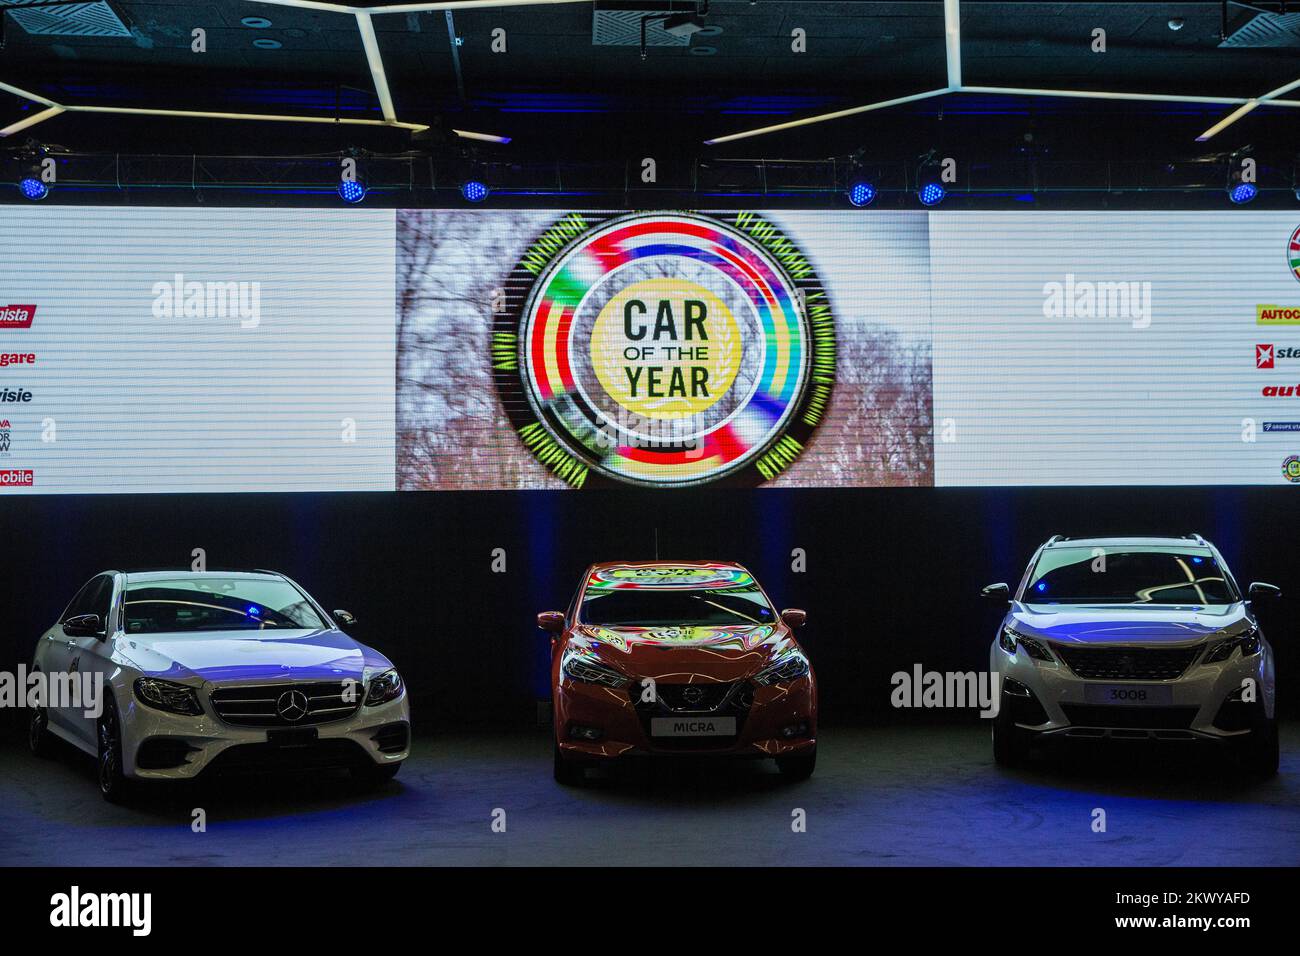 06.03.2017, Geneva, Switzerland - Mercedes E-Class, Nissan Micra and Peugeot 3008 on stage at the Car of the year 2017 award ceremony. Photo: Saso Domijan/HaloPix/PIXSELL  Stock Photo